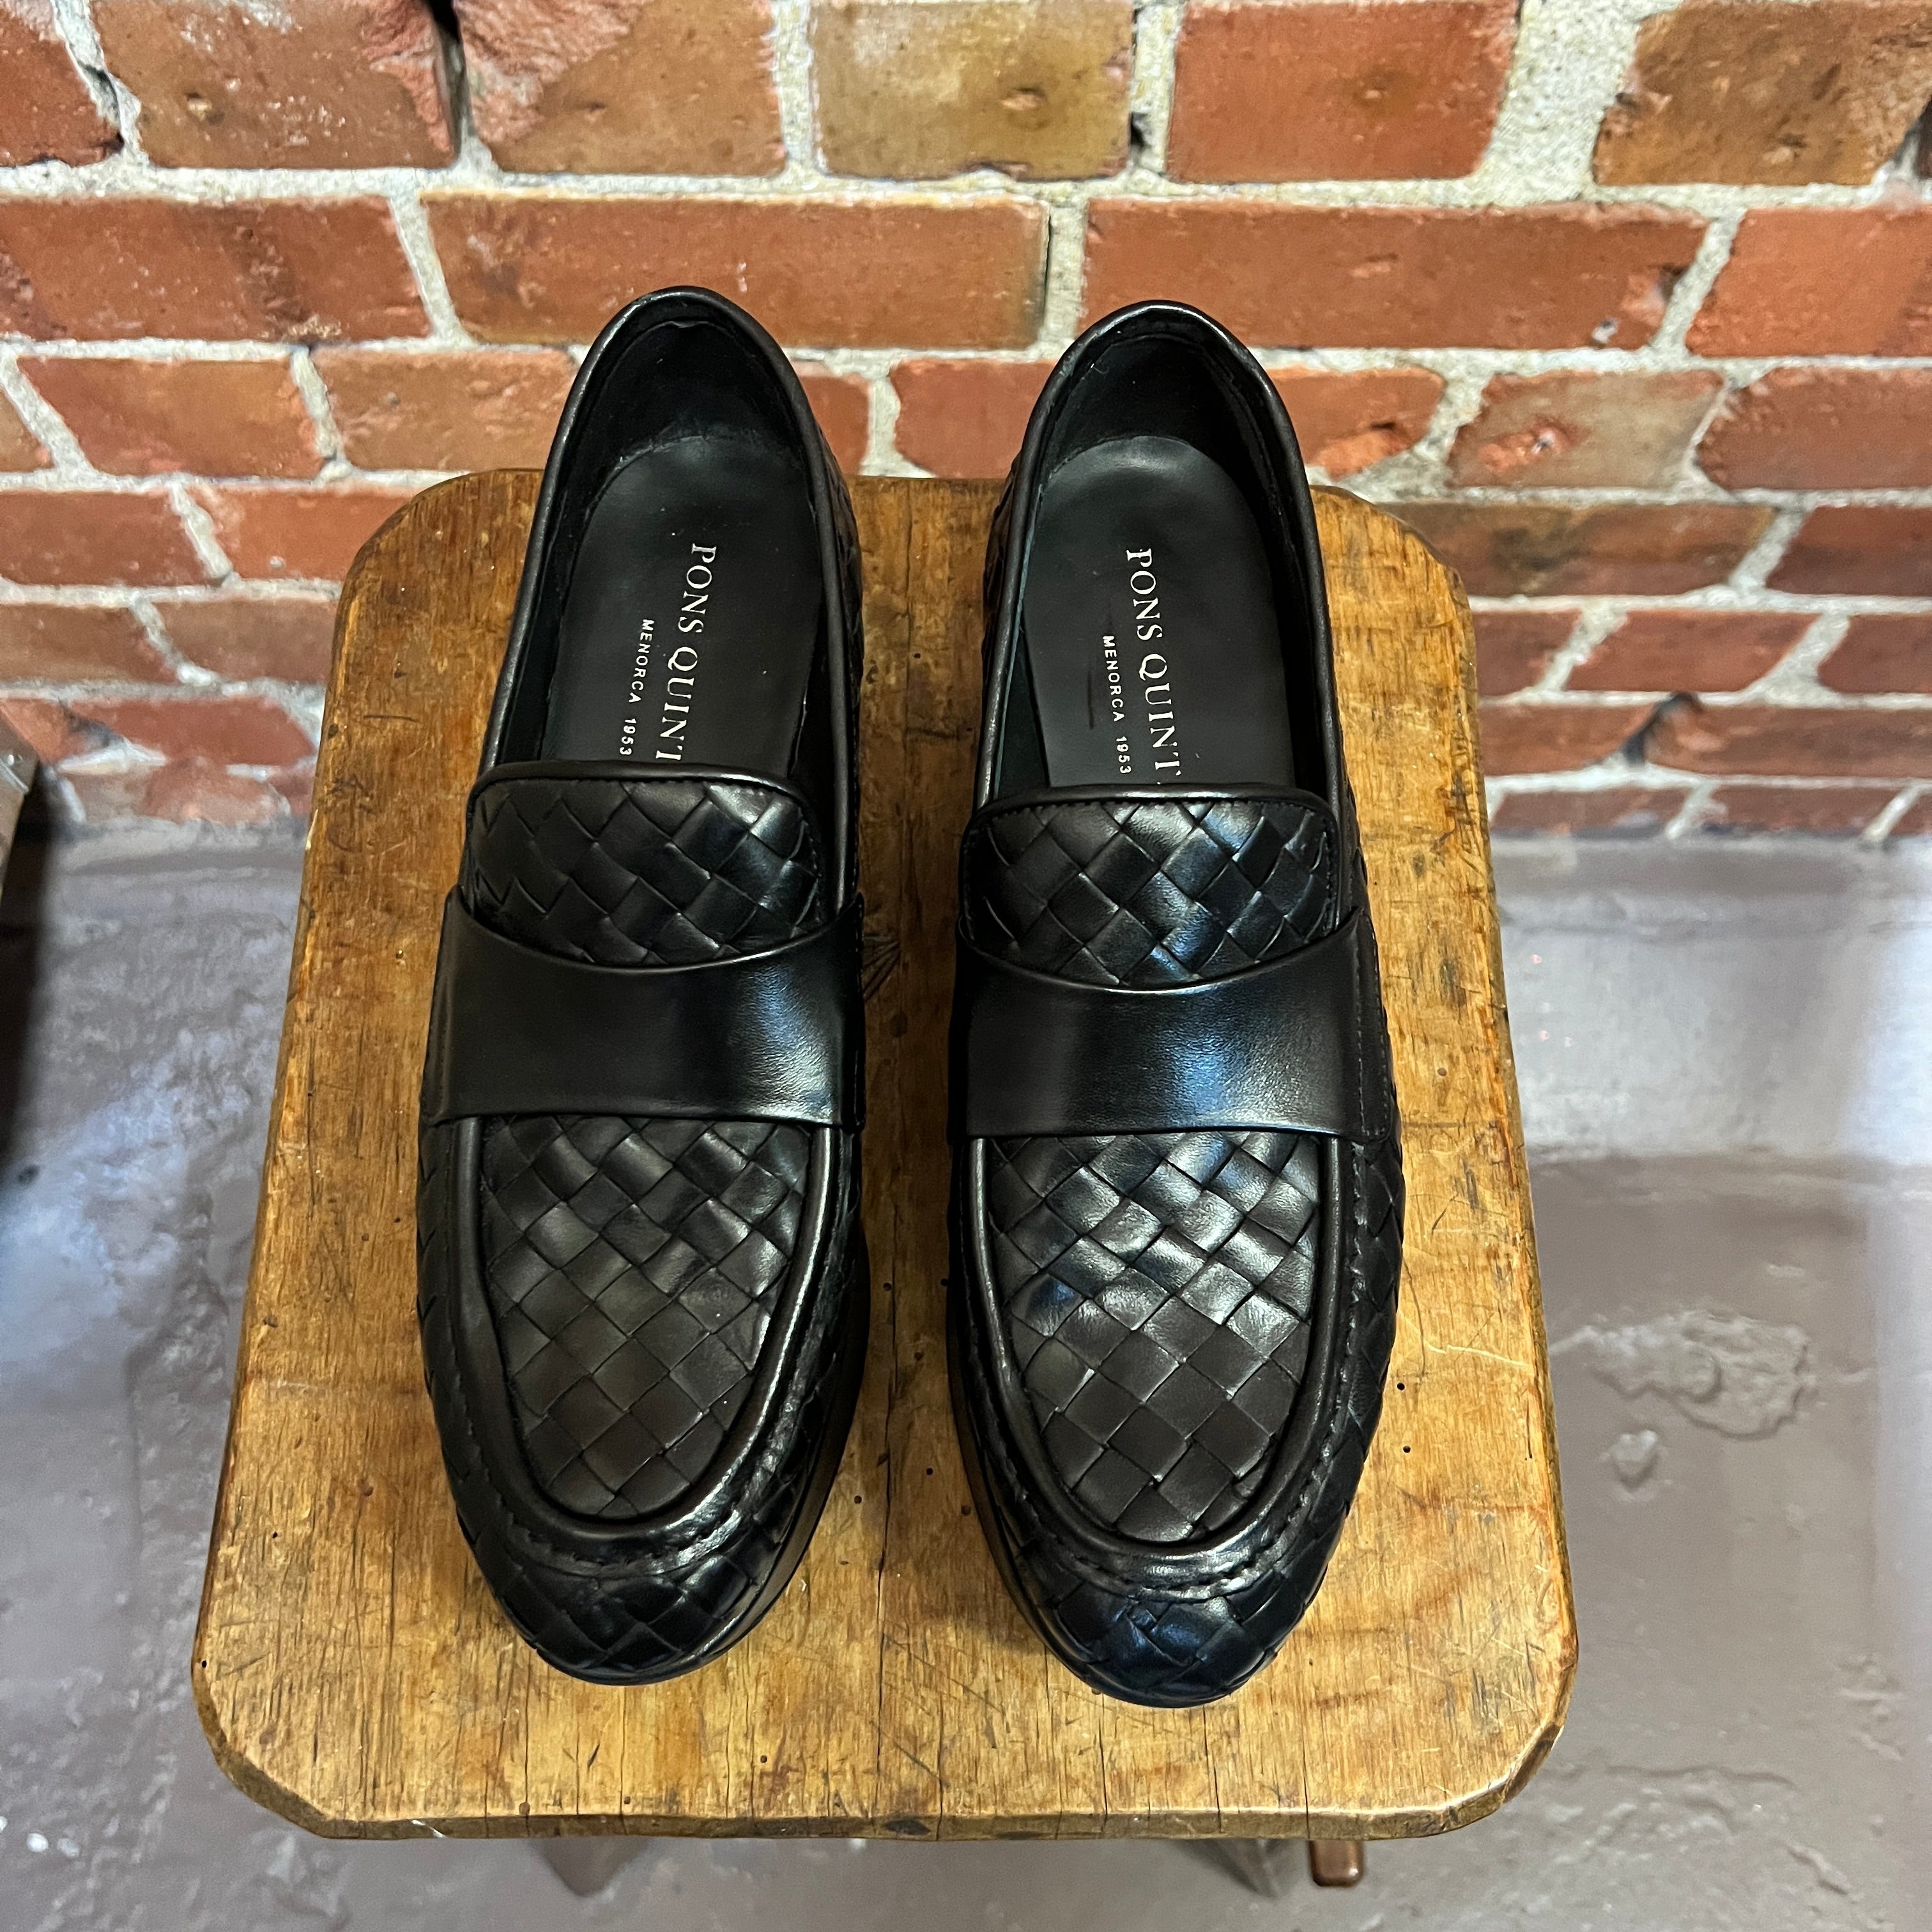 PONS QUINTANA Woven leather loafers 38